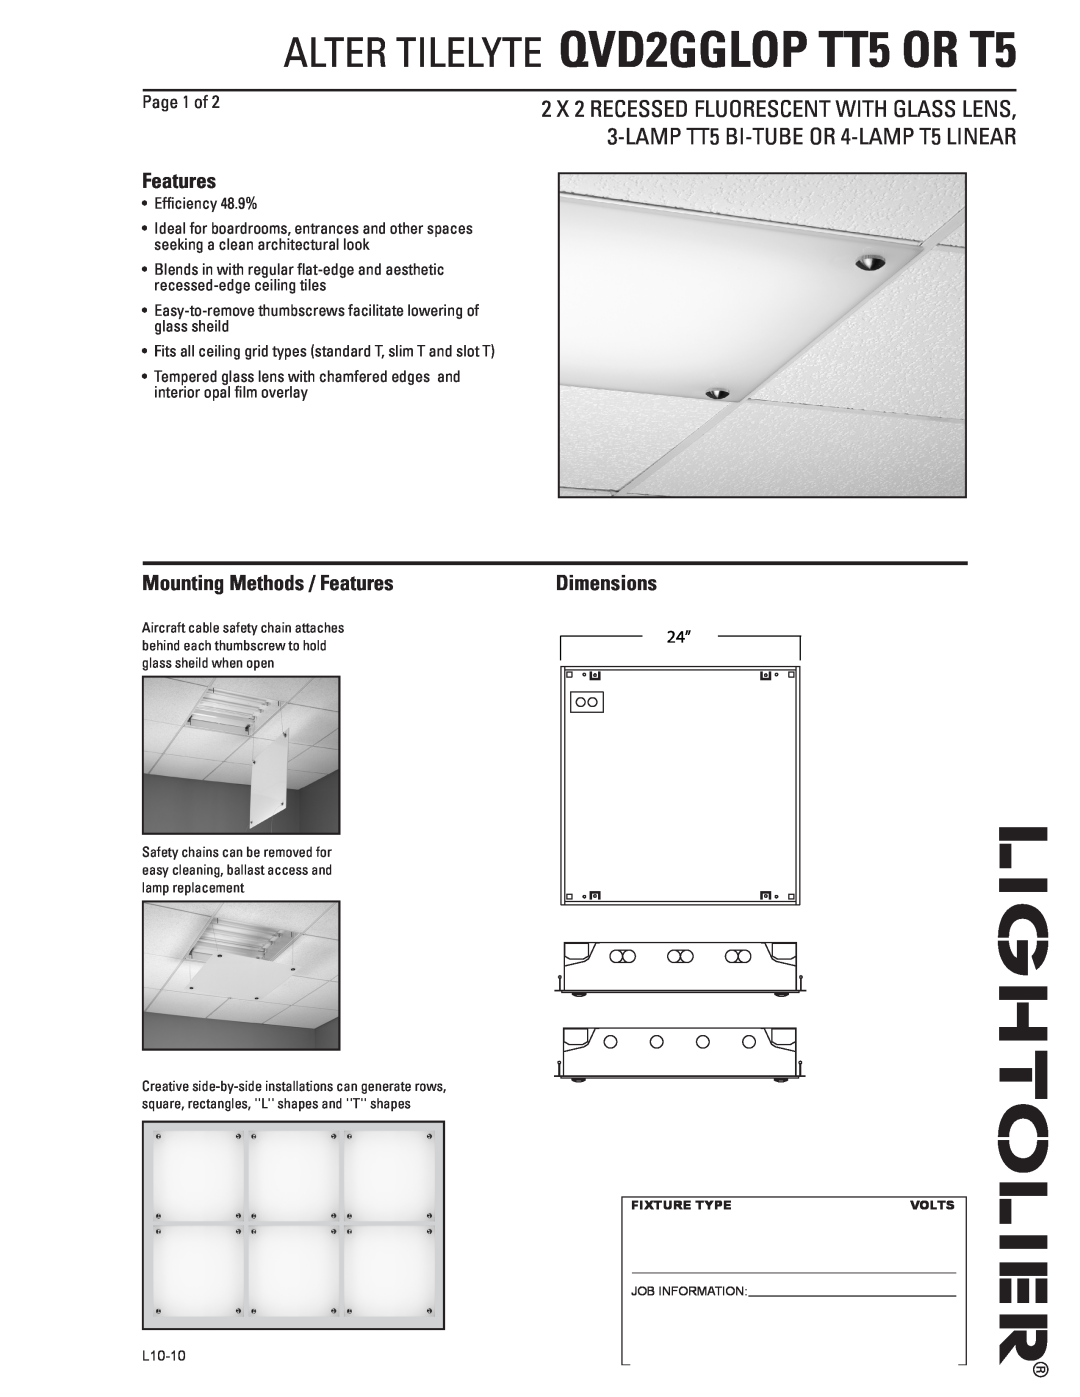 Lightolier dimensions alter Tilelyte QVD2GGLOP TT5 or T5, Page 1 of, 24’’, Mounting Methods / Features, Dimensions 